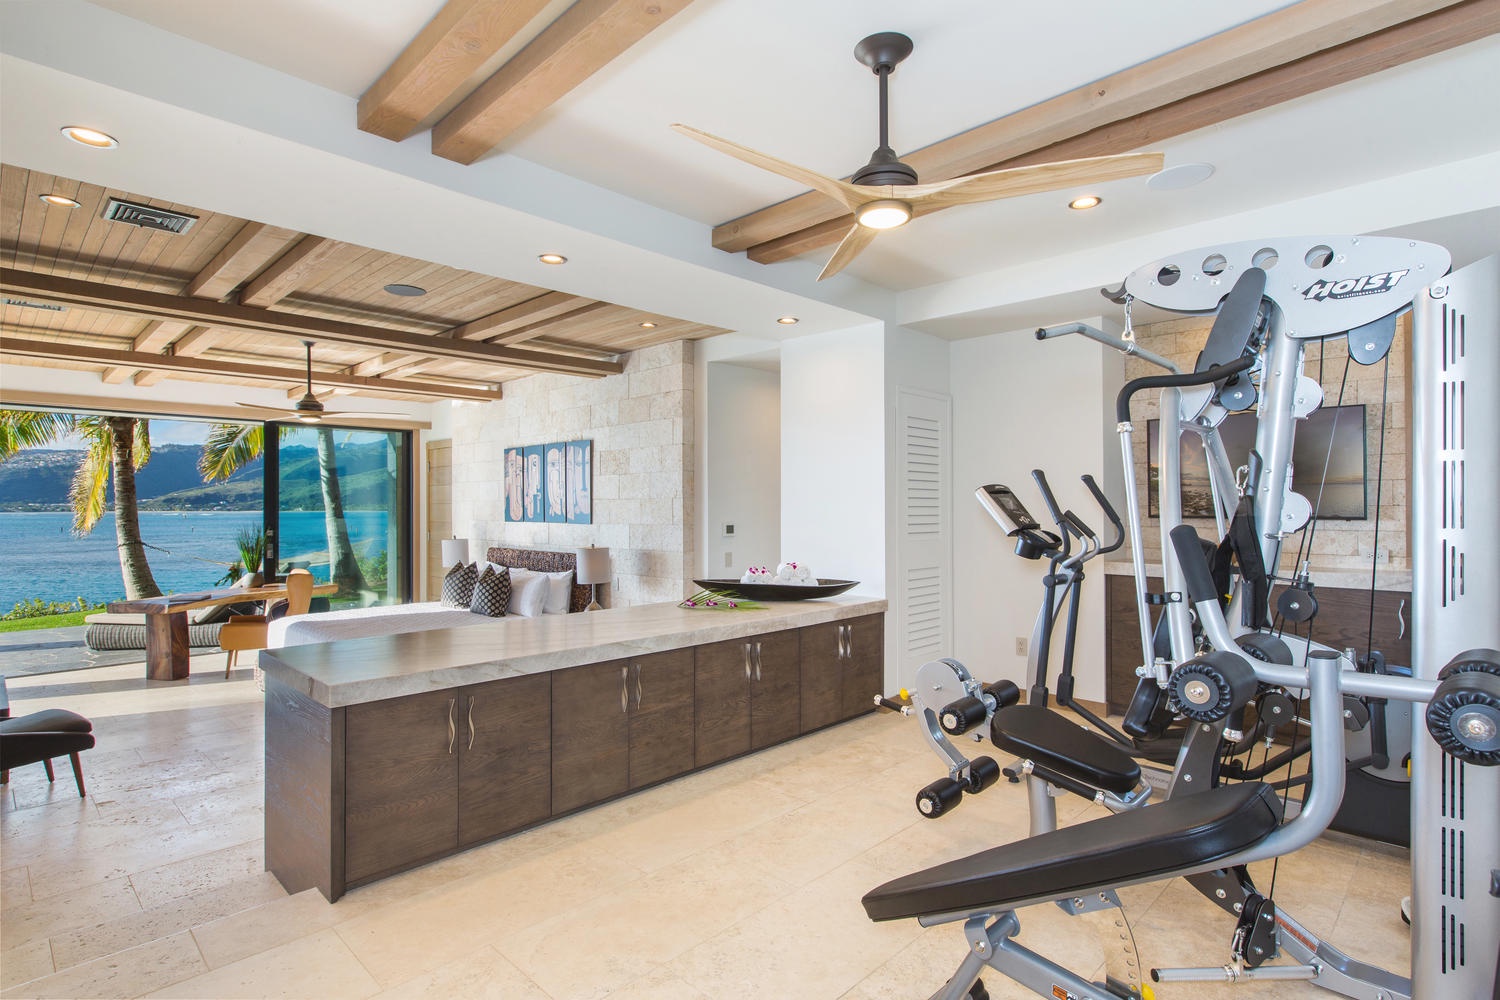 Honolulu Vacation Rentals, Maunalua Bay Estate 4 Bedroom - Fitness room and downstairs bedroom